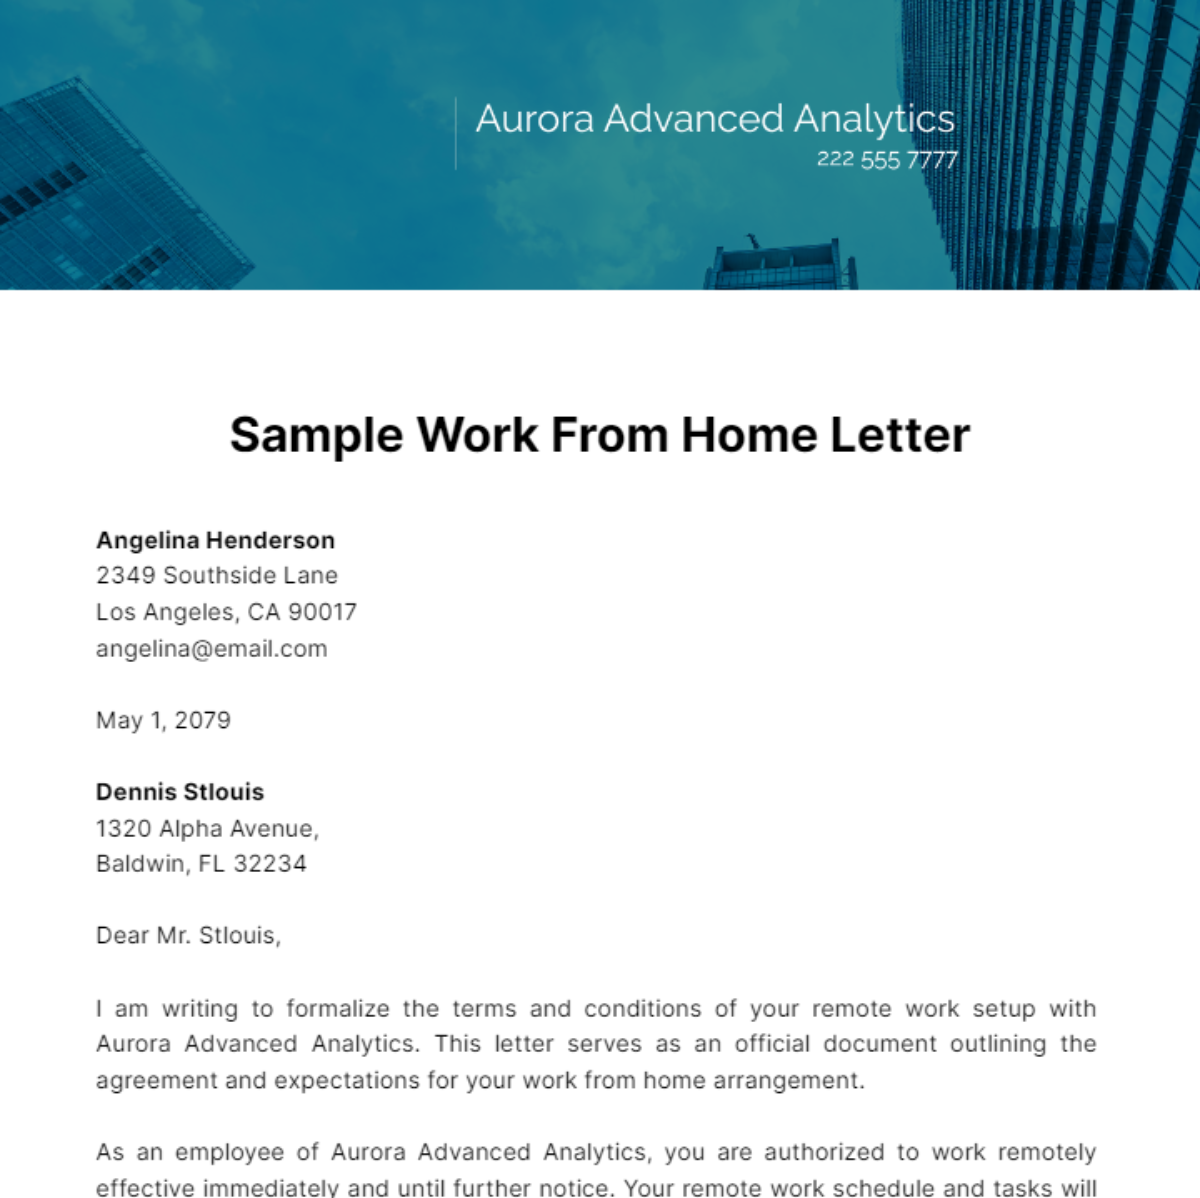 Sample Work from Home Letter   Template